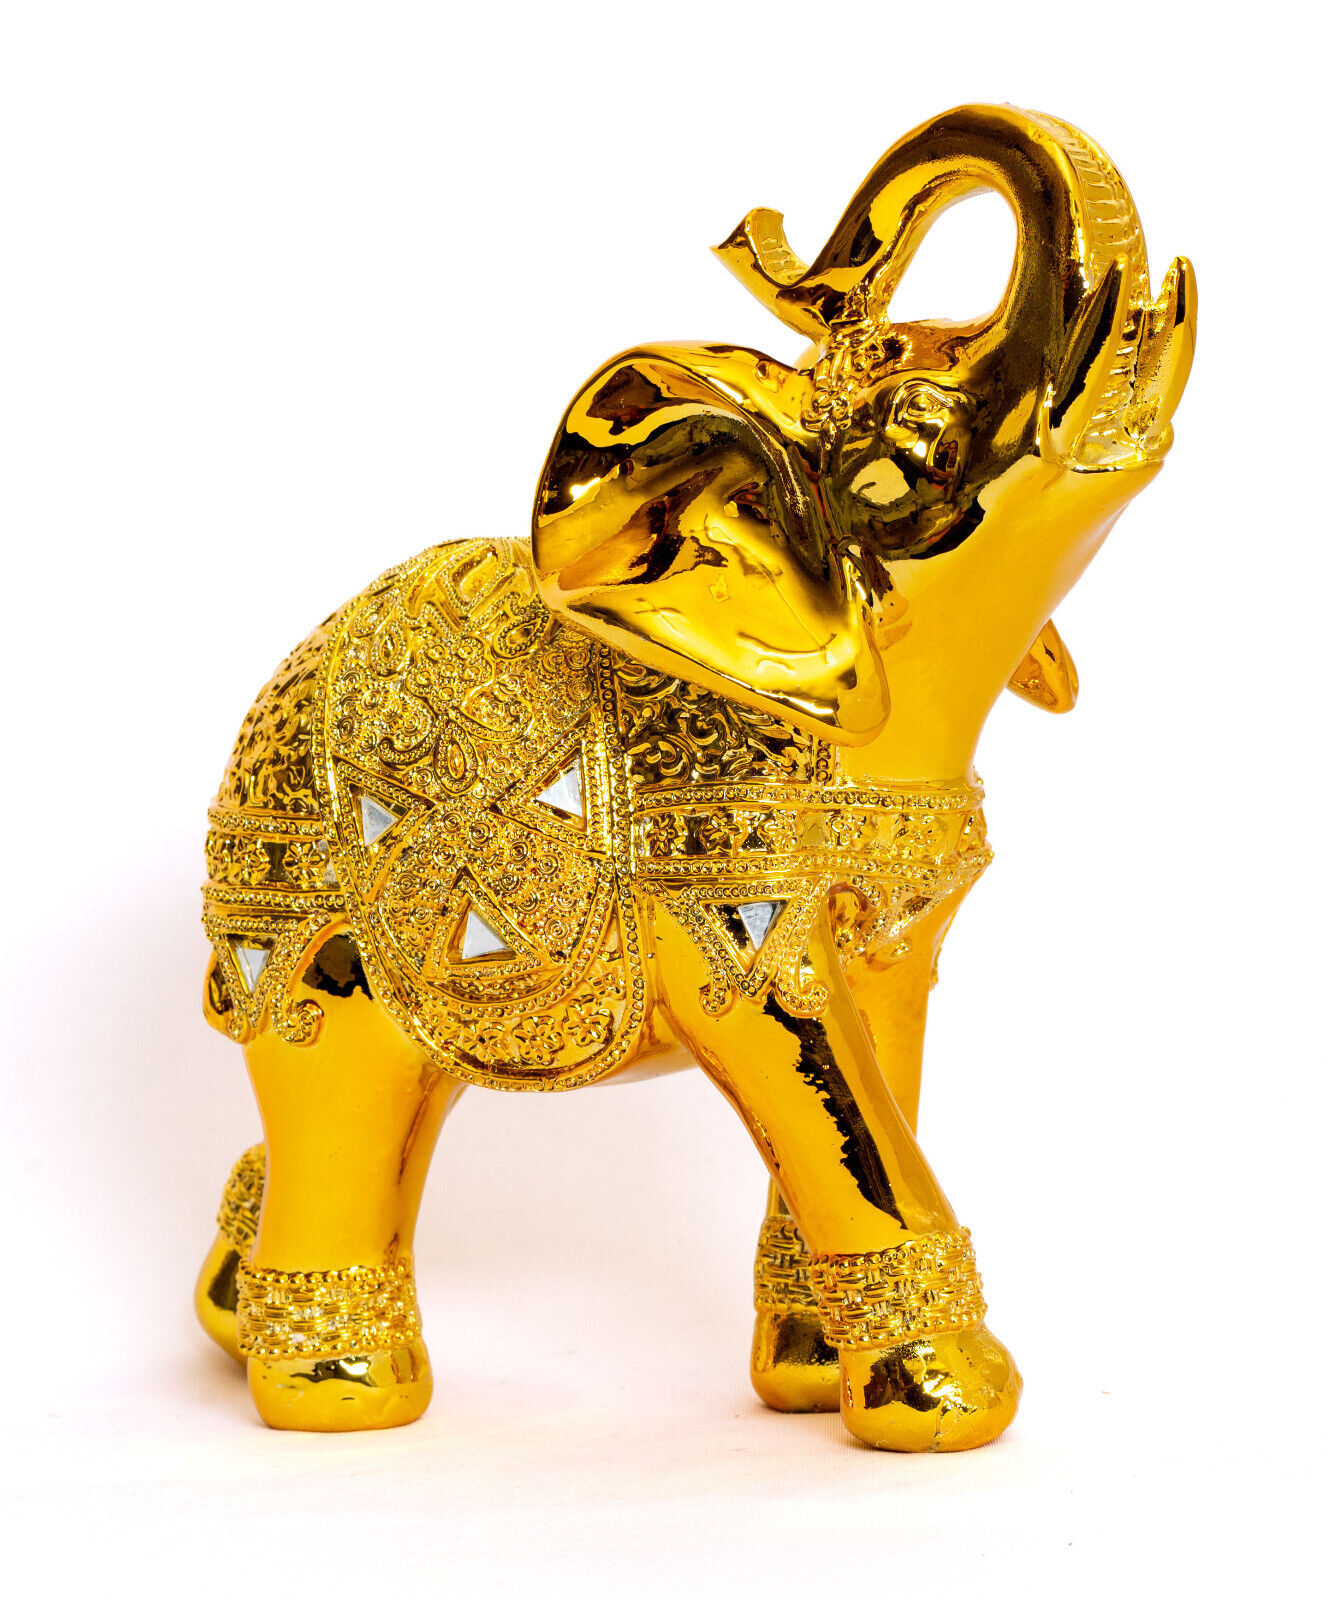 BUY ONE GET ONE FREE | LABOR DAY SALE 10” (H) Gold Color Elephant Statue  Decor